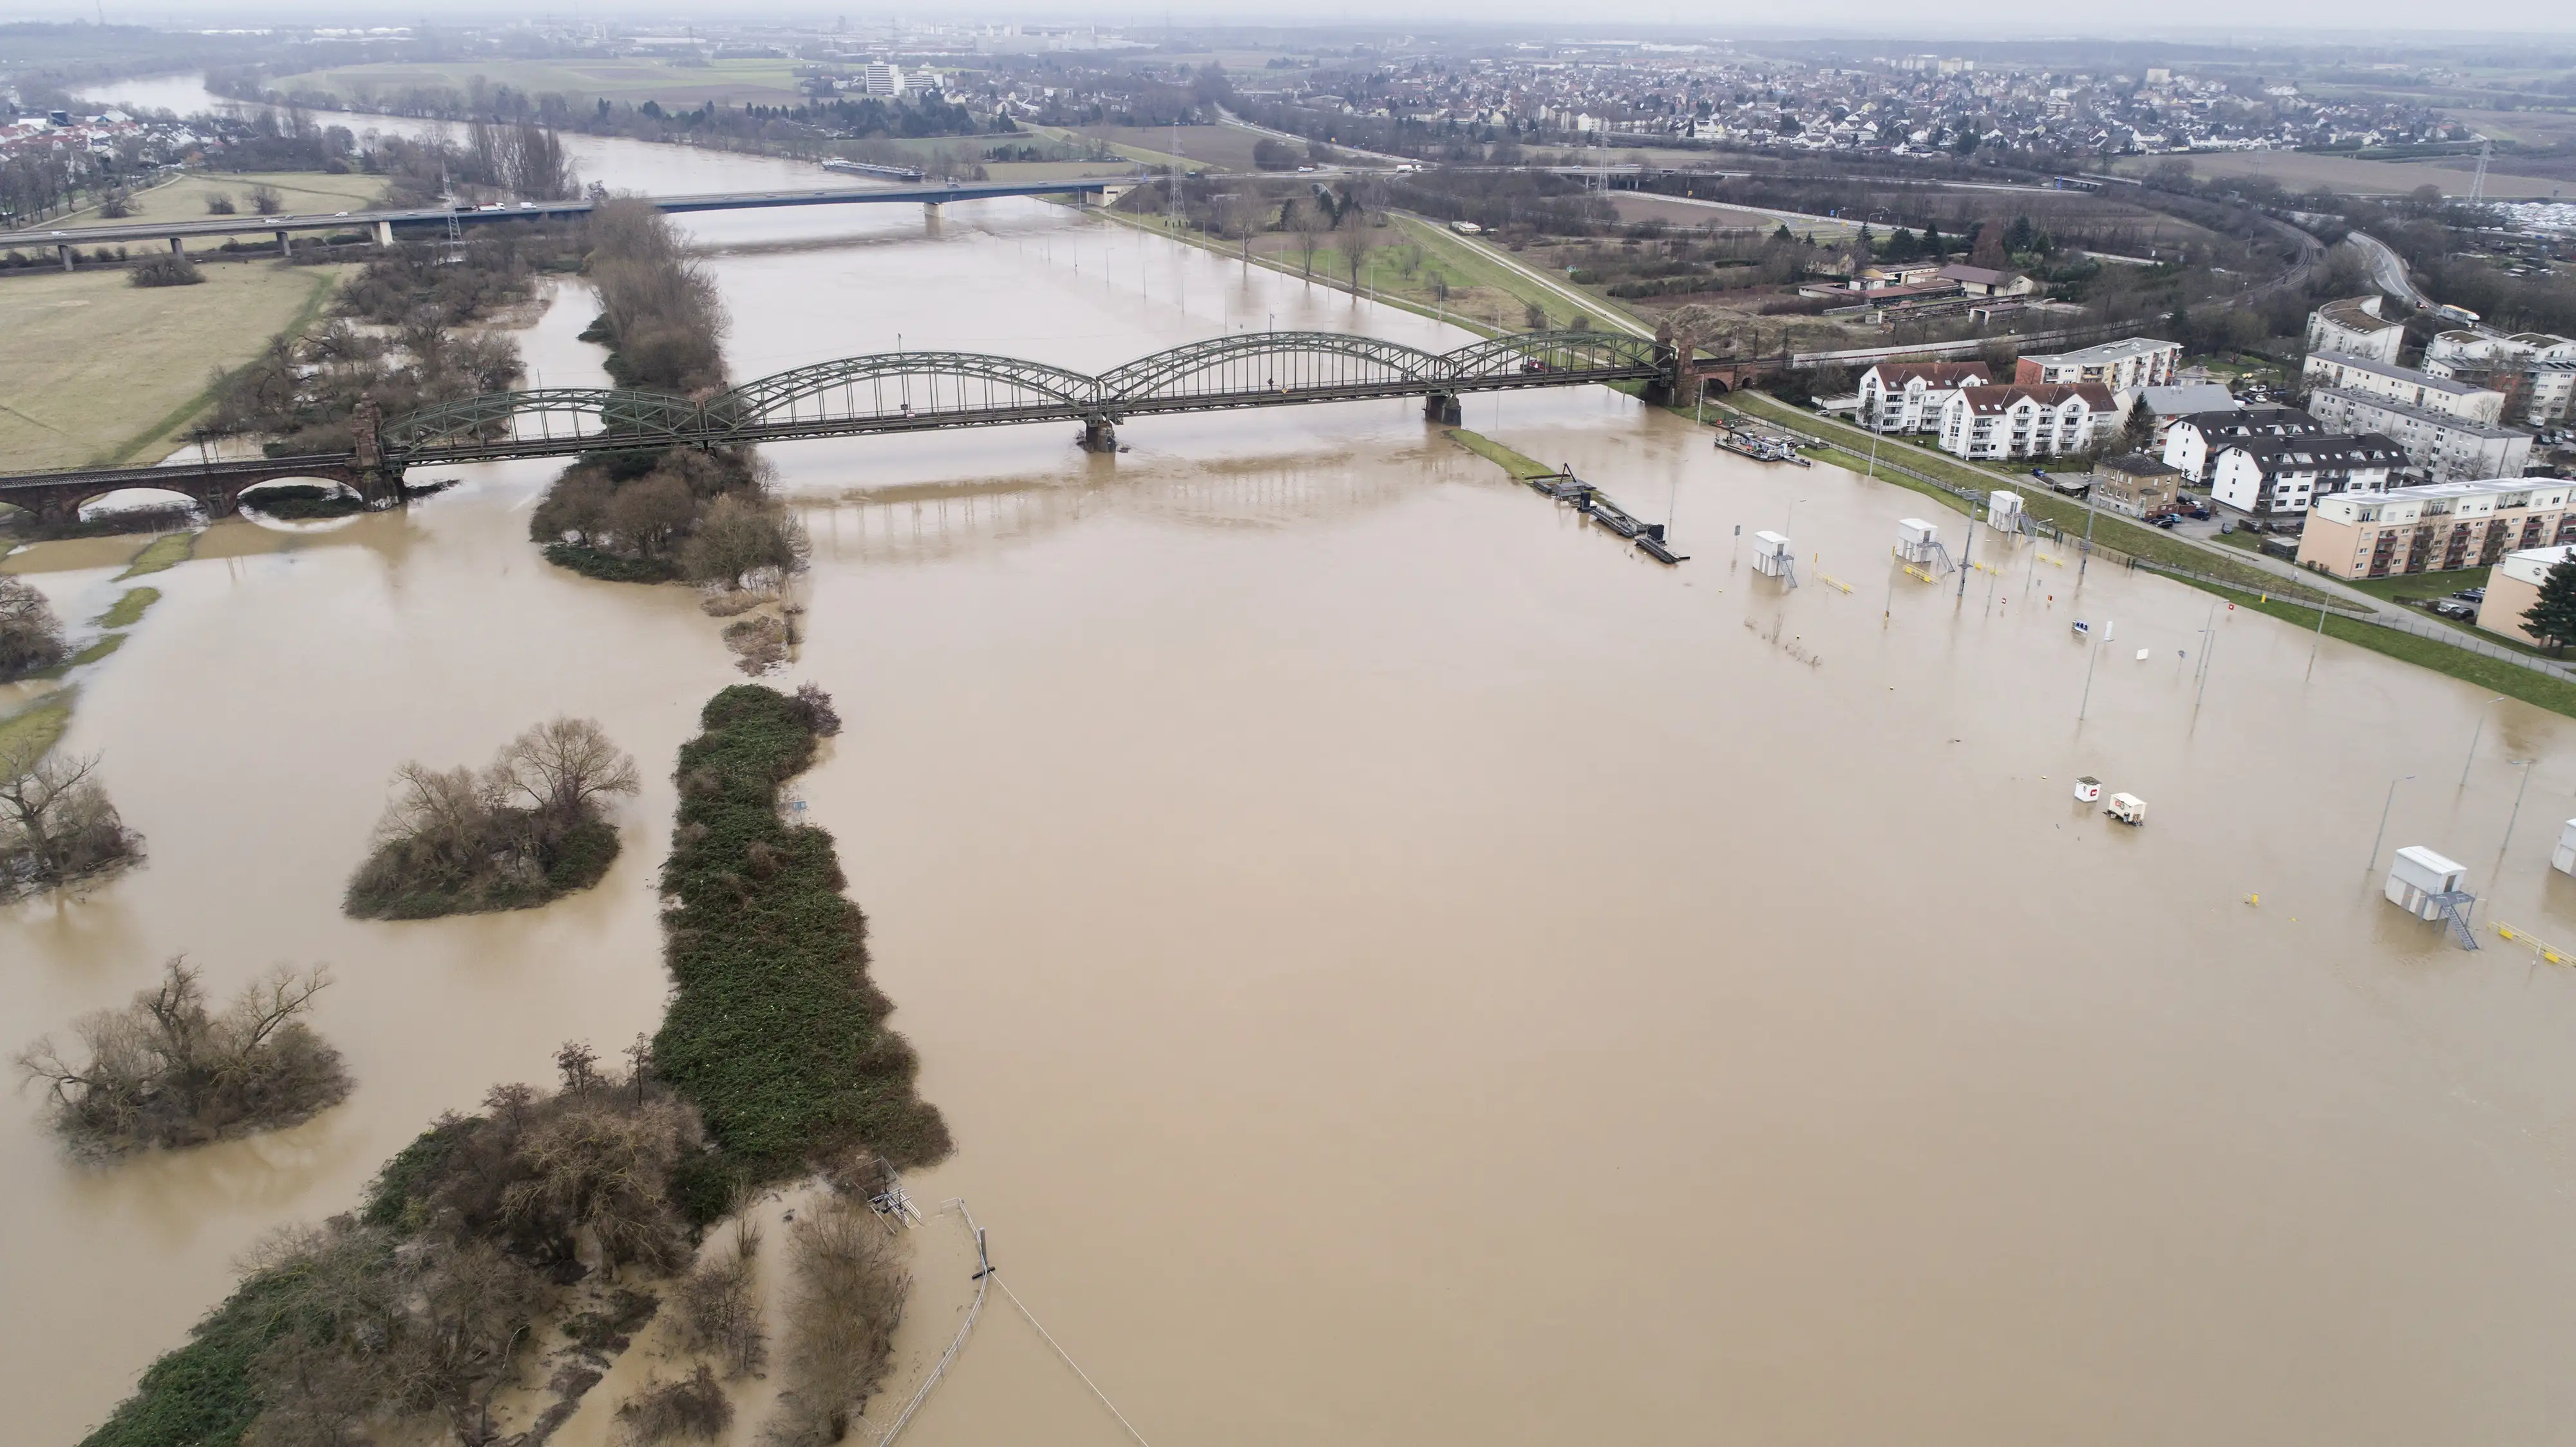 Flooded riverbanks of River Main, Germany after heavy rainfalls